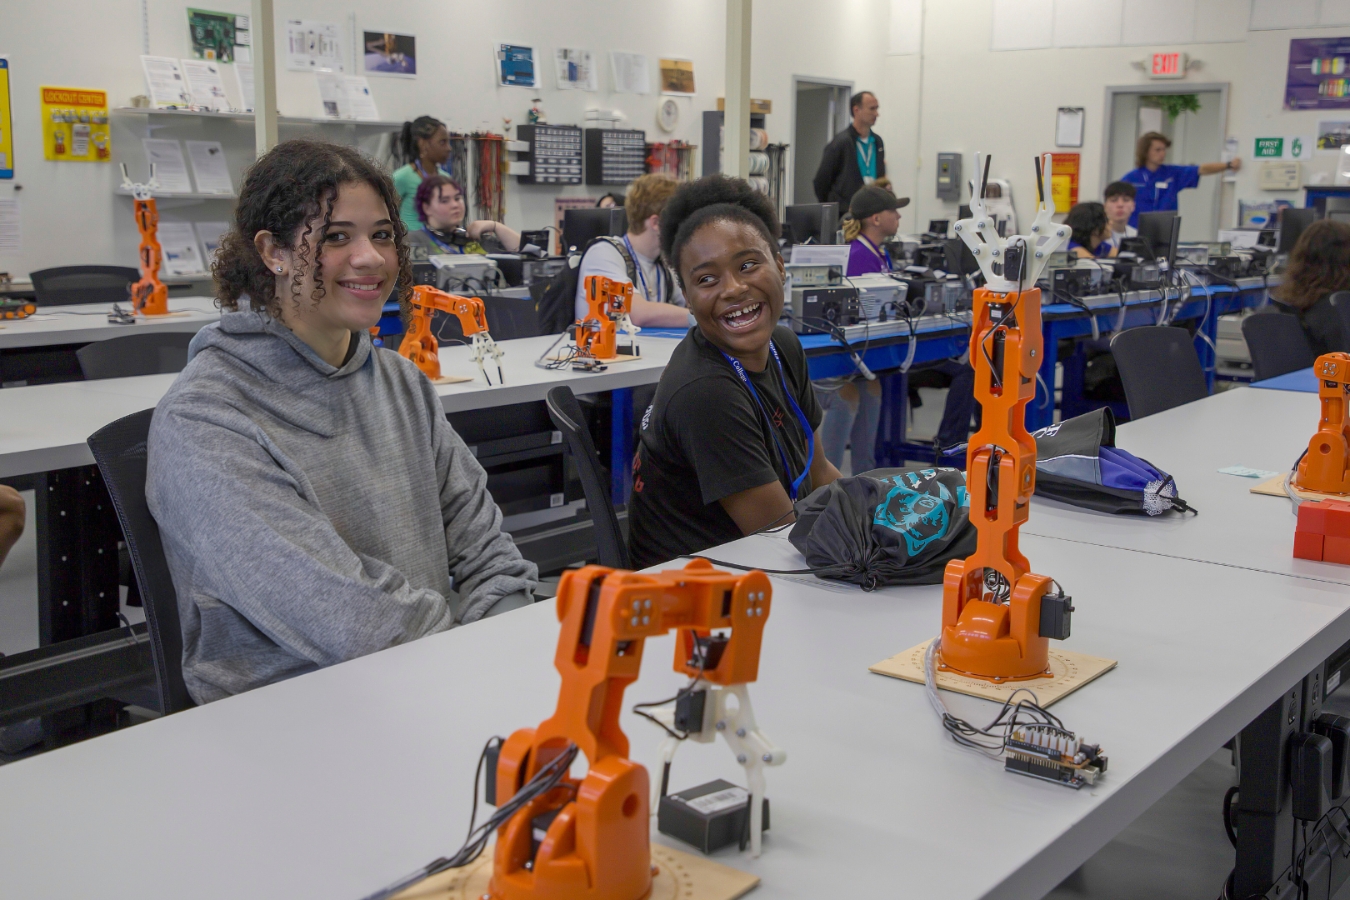 Two female students actively participating in hands-on robotics learning and practice in our state-of-the-art robotics lab.